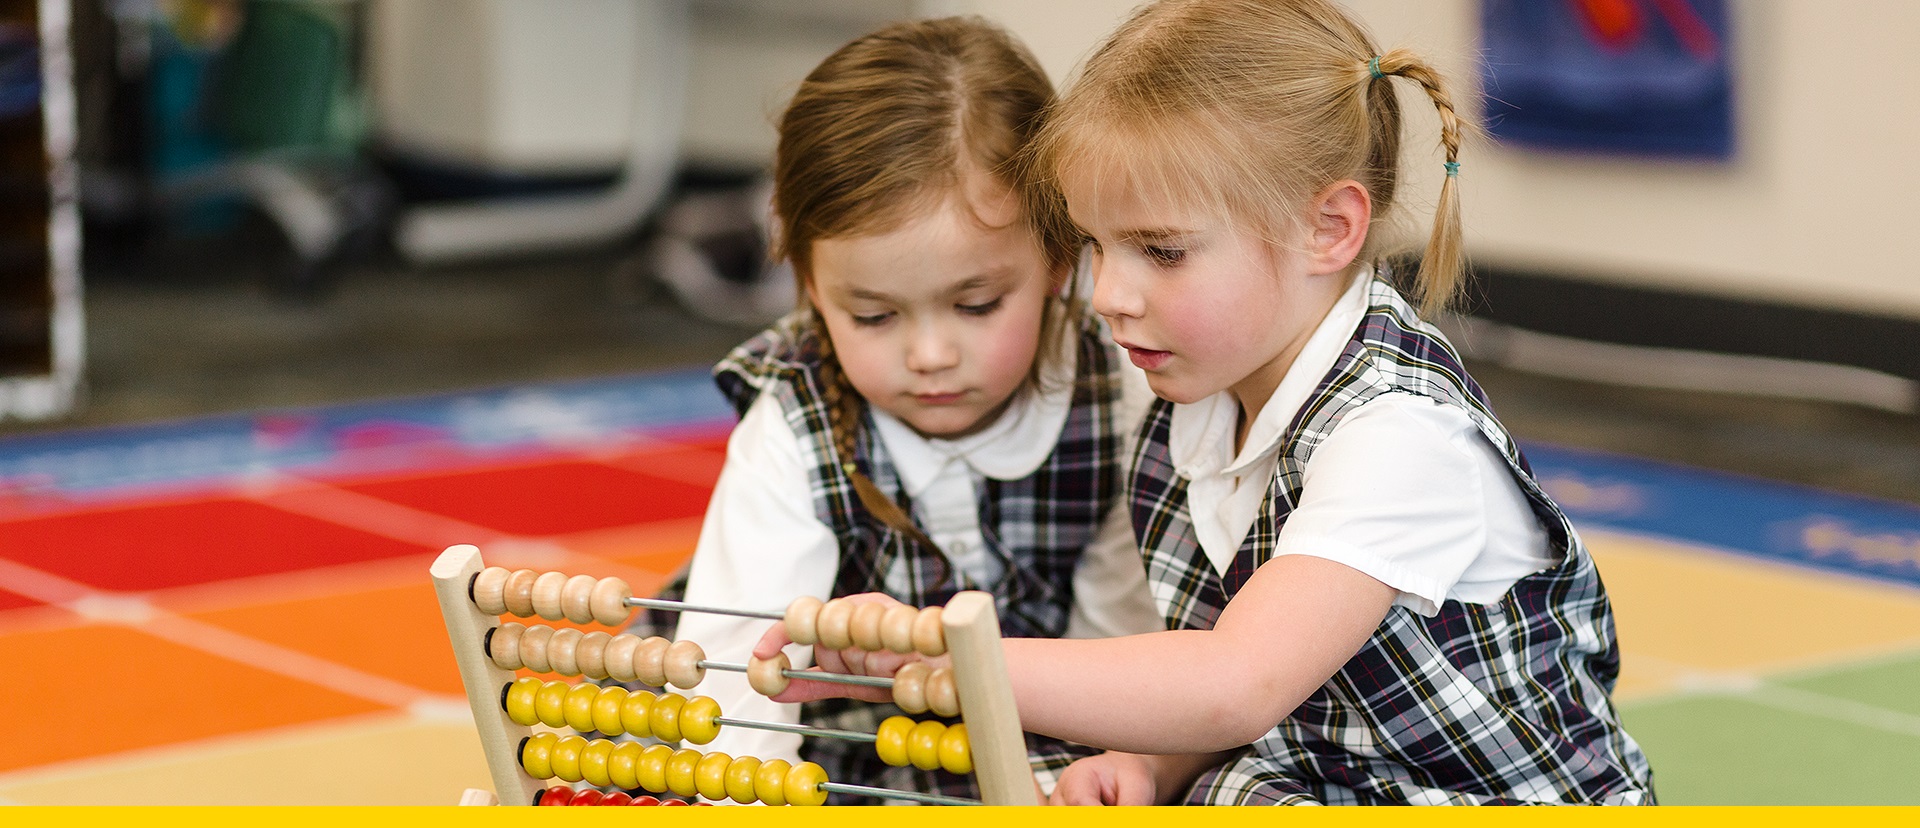 Two young girls sit on the floor of a classroom while working with an abacus